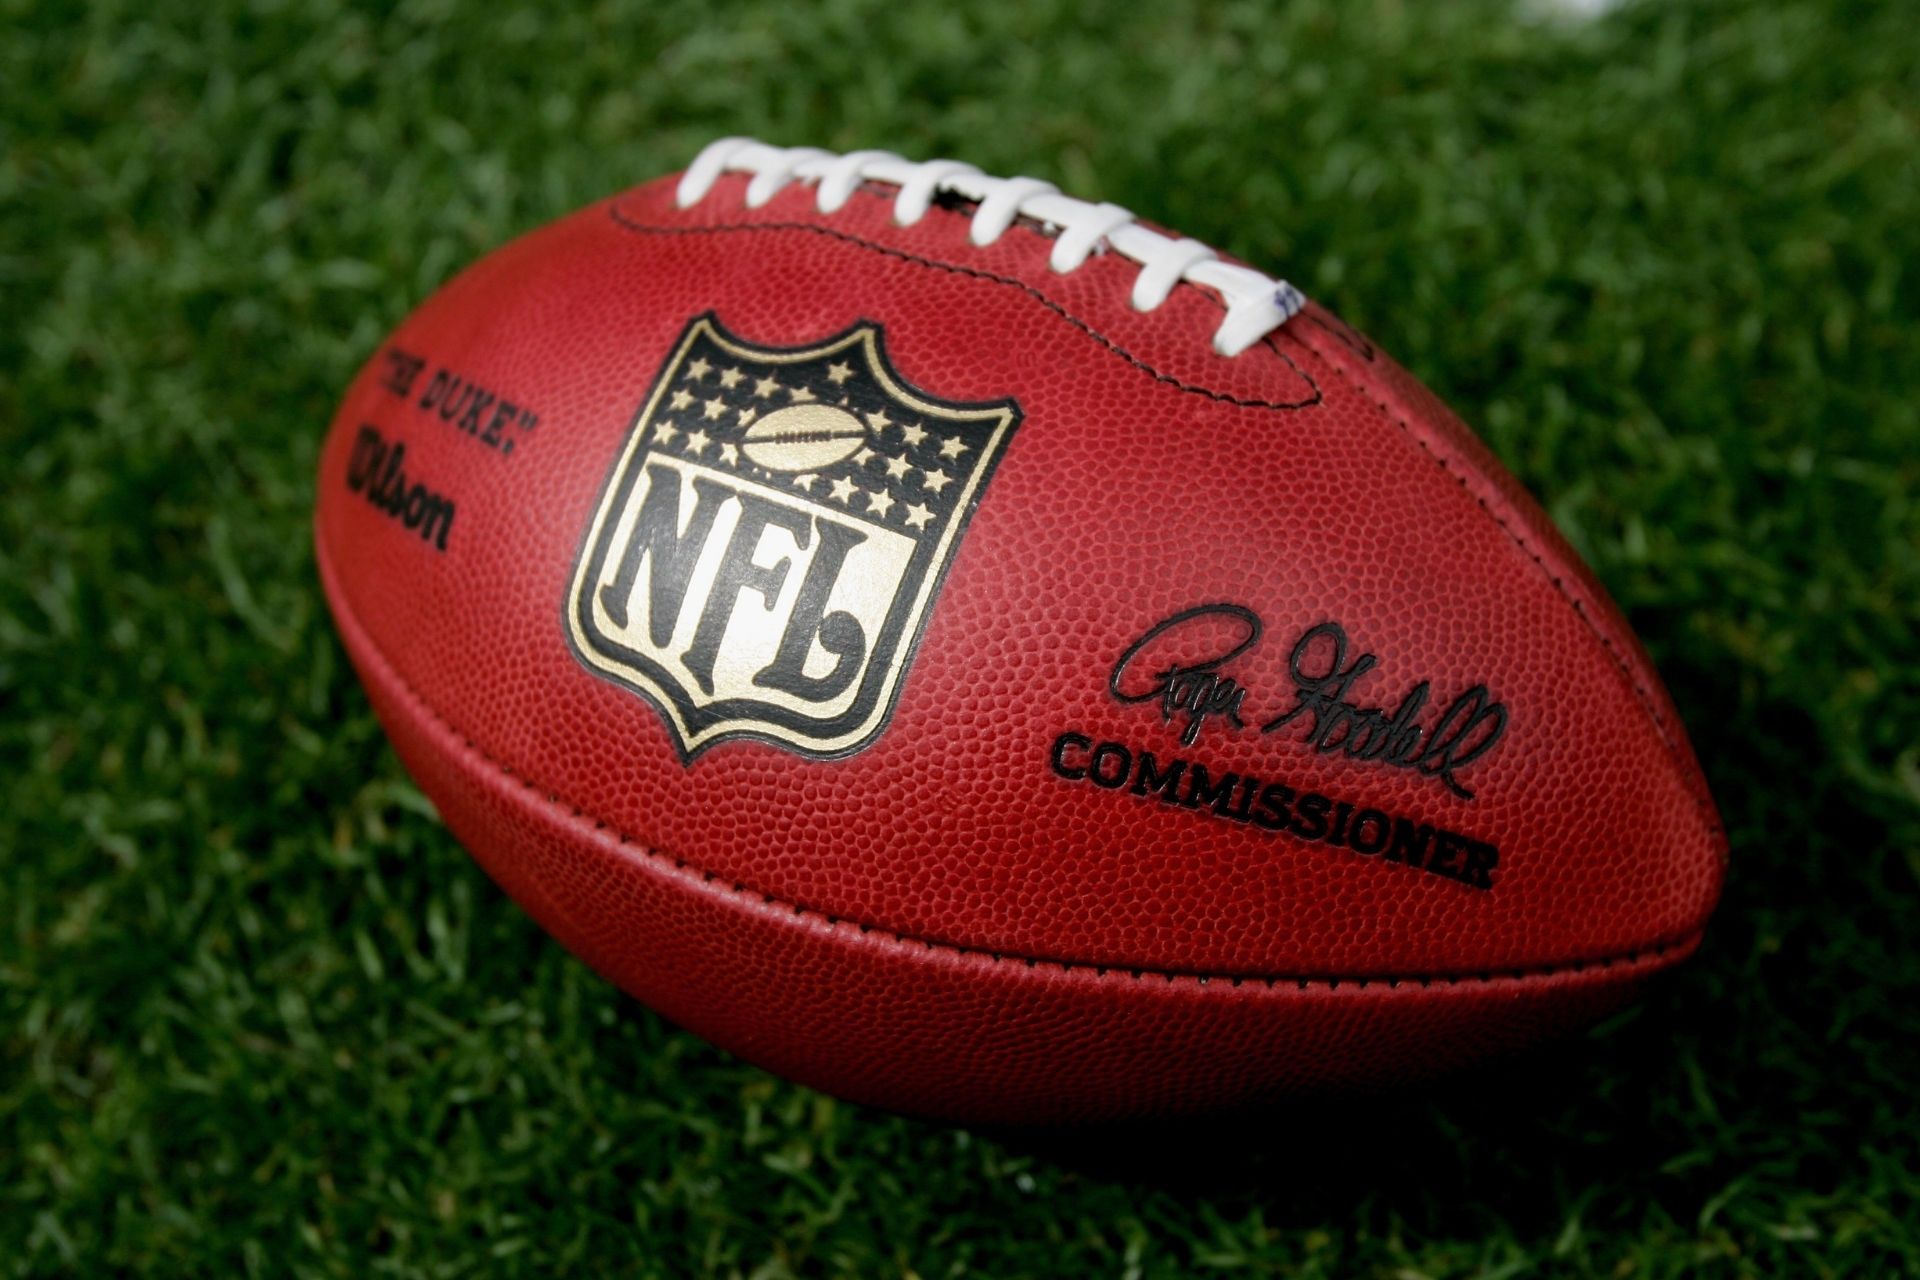 This news could be the end of the NFL as we know it Sports with Balls